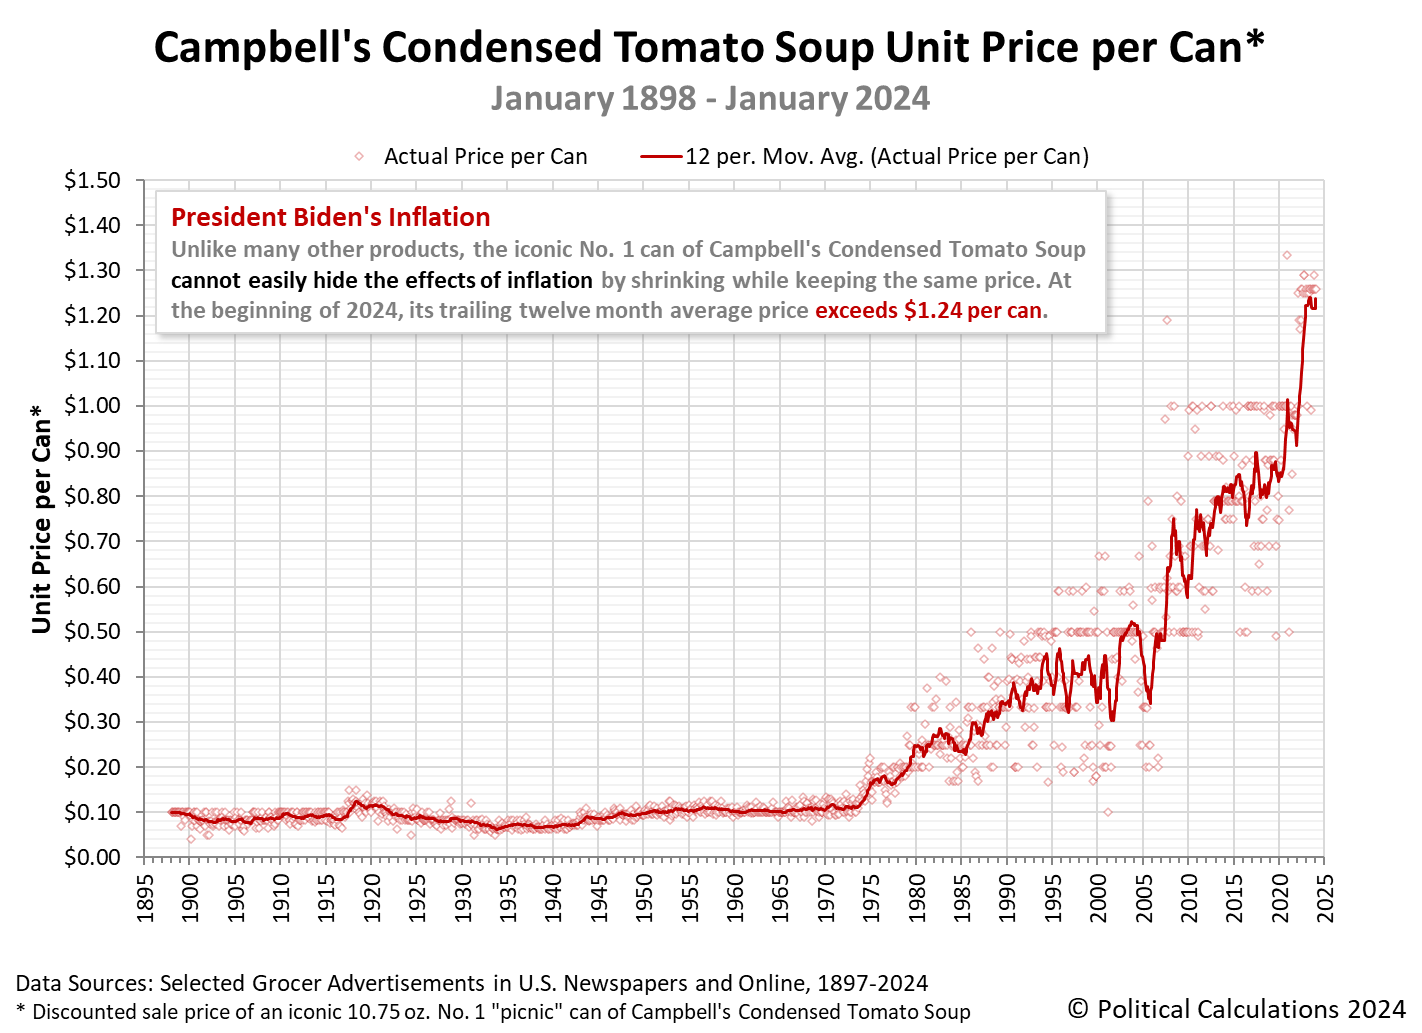 Campbell's Condensed Tomato Soup Unit Price per Can, January 1898 - January 2024 (Linear Scale)